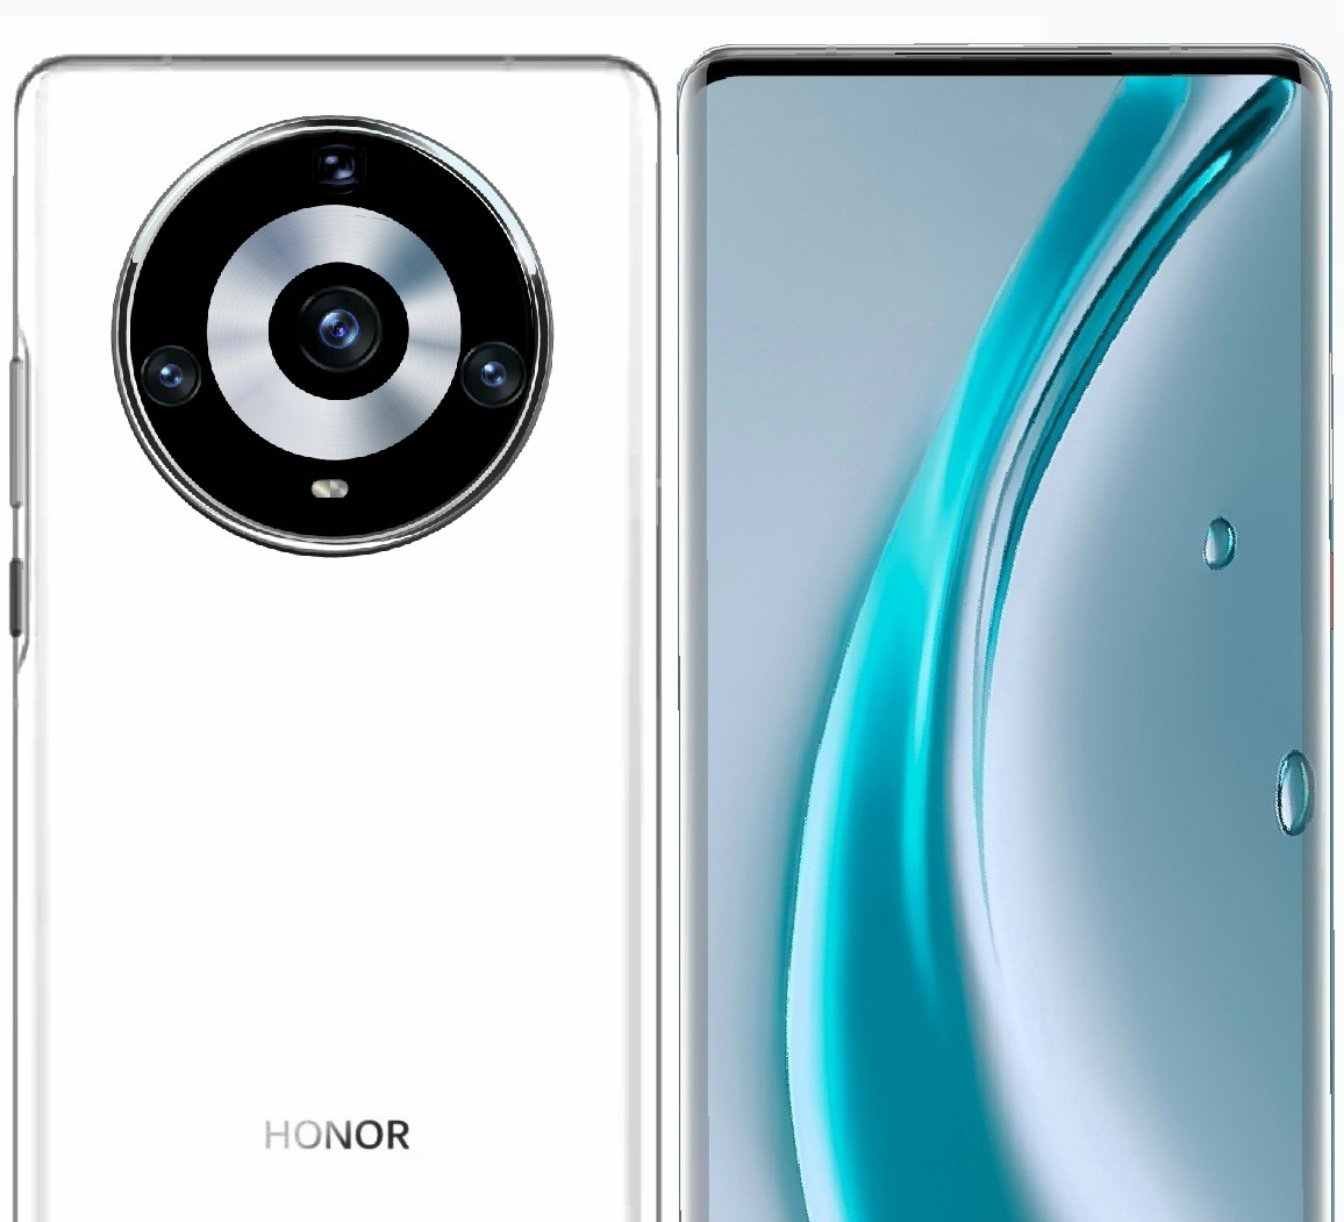 Honor Magic 3 Pro Price and Specs: Display, Battery, SoC, and More